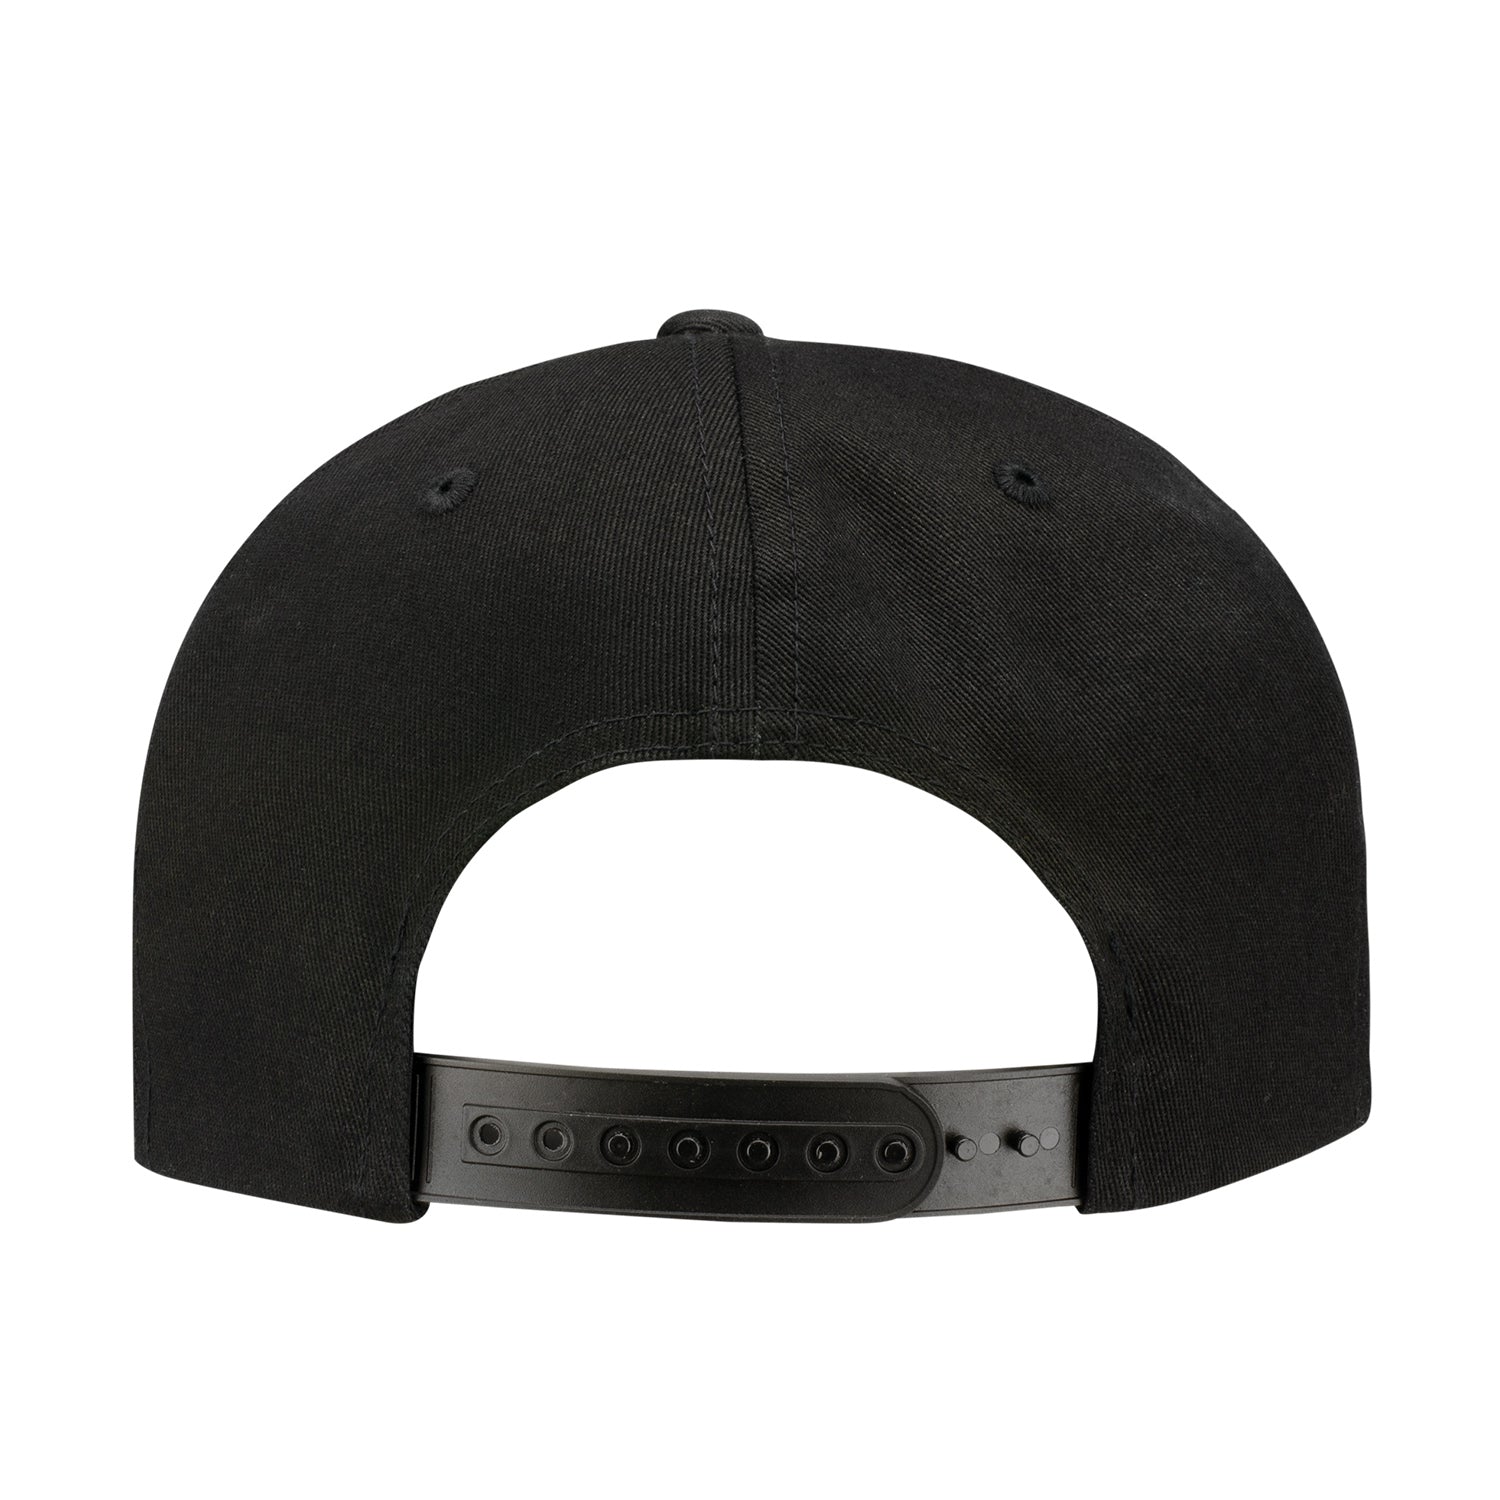 Overwatch 2 Black Flatbill Snapback Hat - Back View, No Text